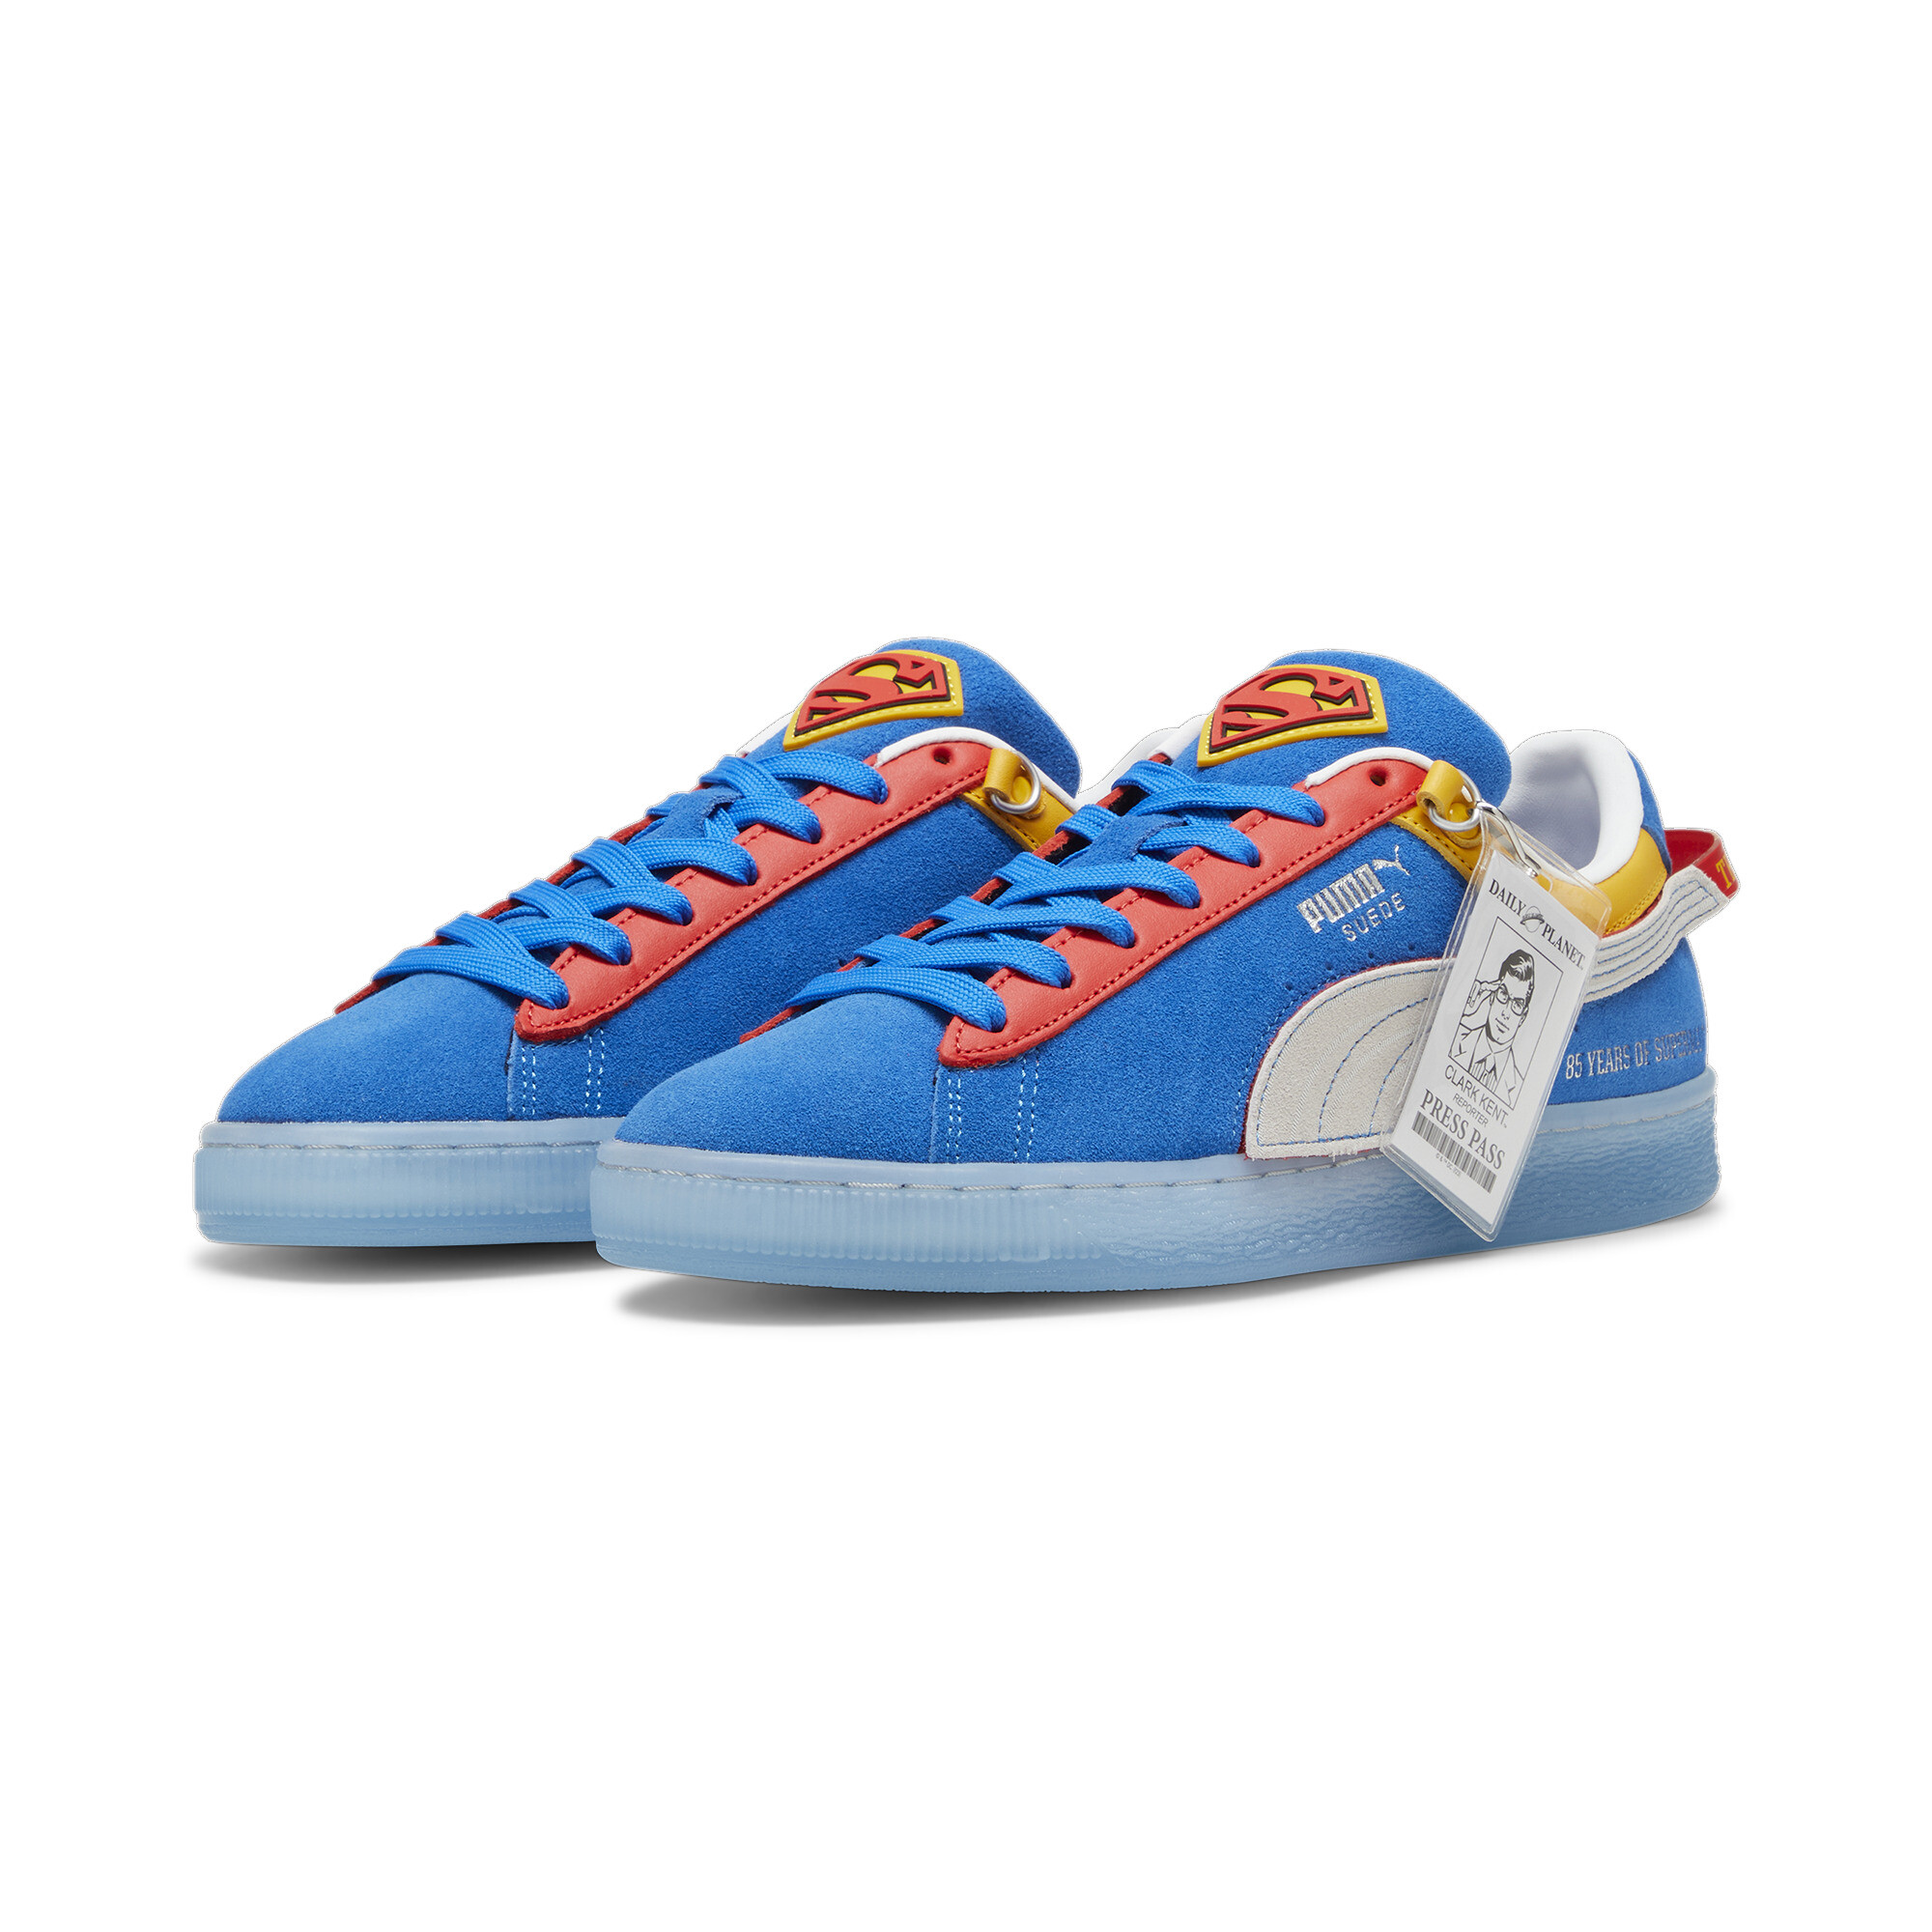 Puma X SUPERMAN 85th Anniversary Suede Sneakers, Blue, Size 36, Shoes